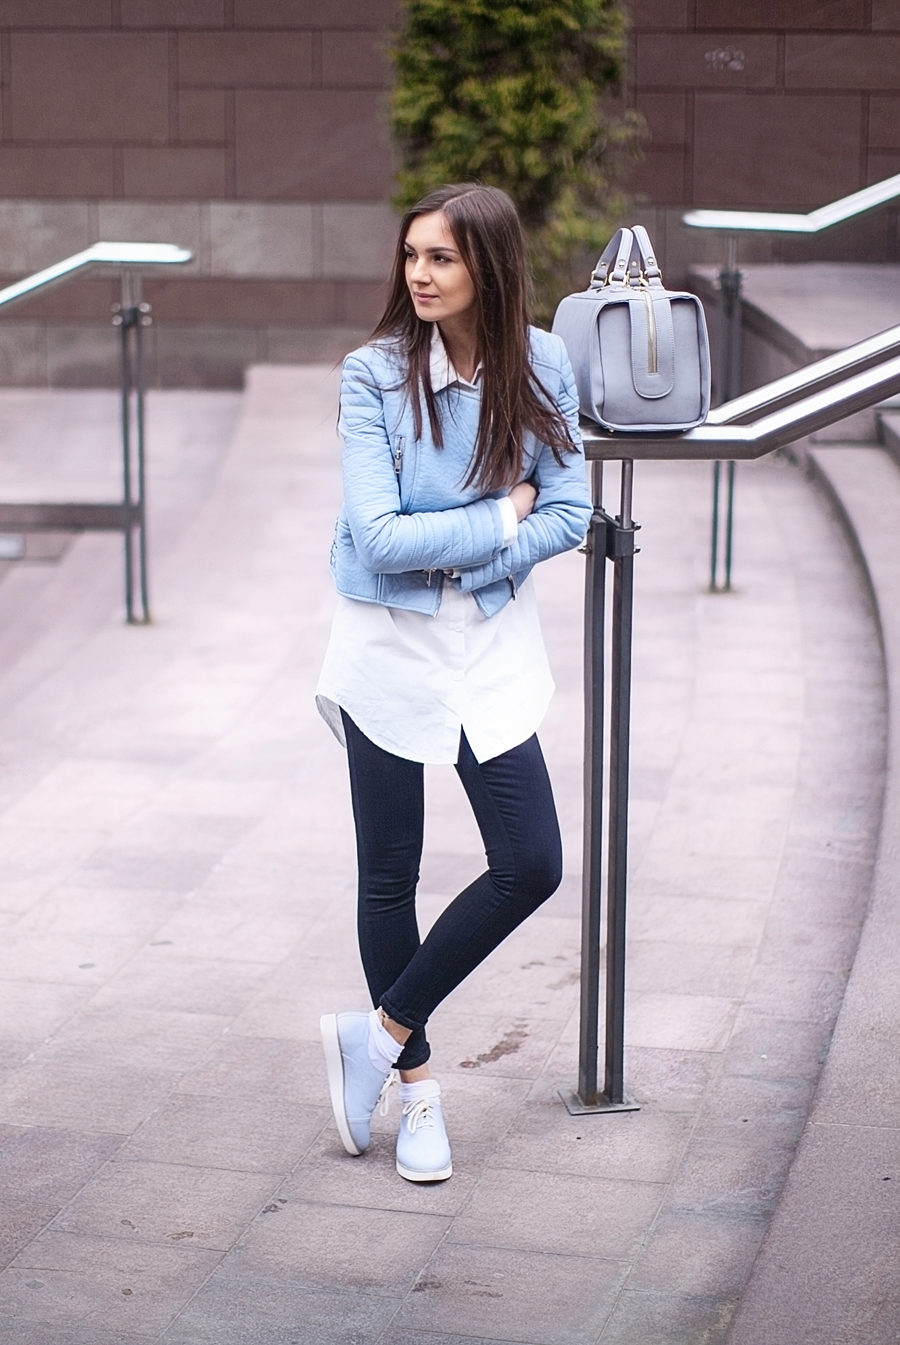 fashion_personal_style_blog_pastel_leather_jacket_white_shirt_black_skinny_jeans_street_style_blogger_outfit_look_zara_5